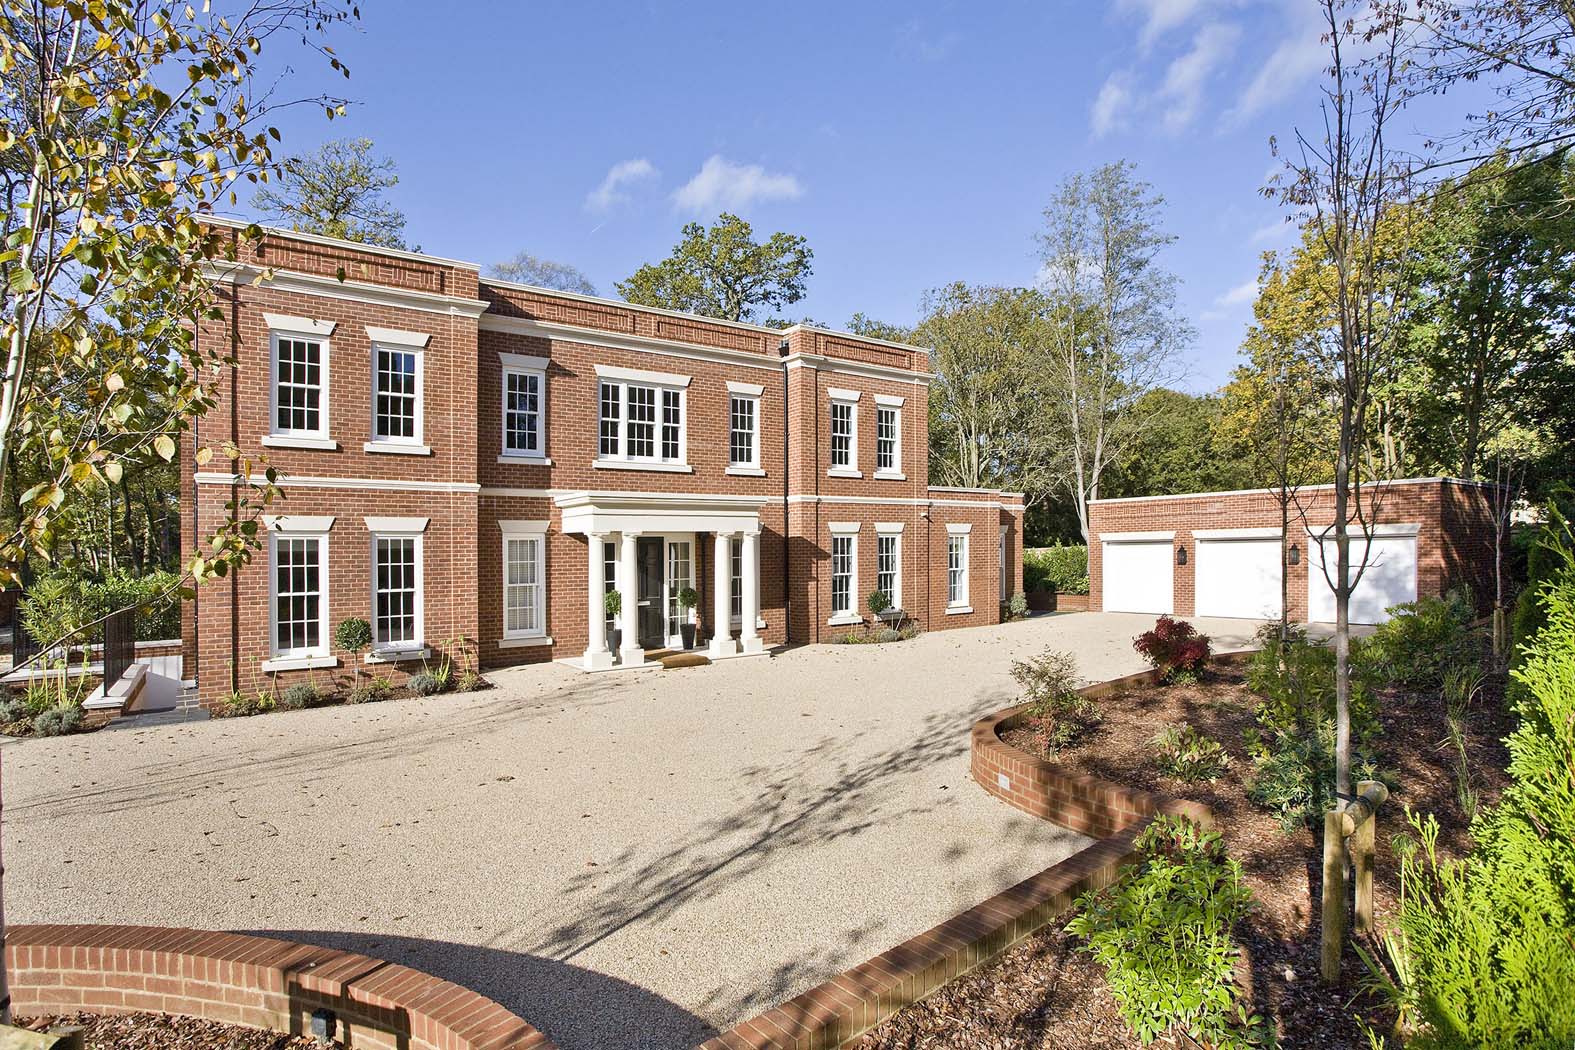 Number 13: Unlucky for some but not for Virginia Water’s millionaire home owners